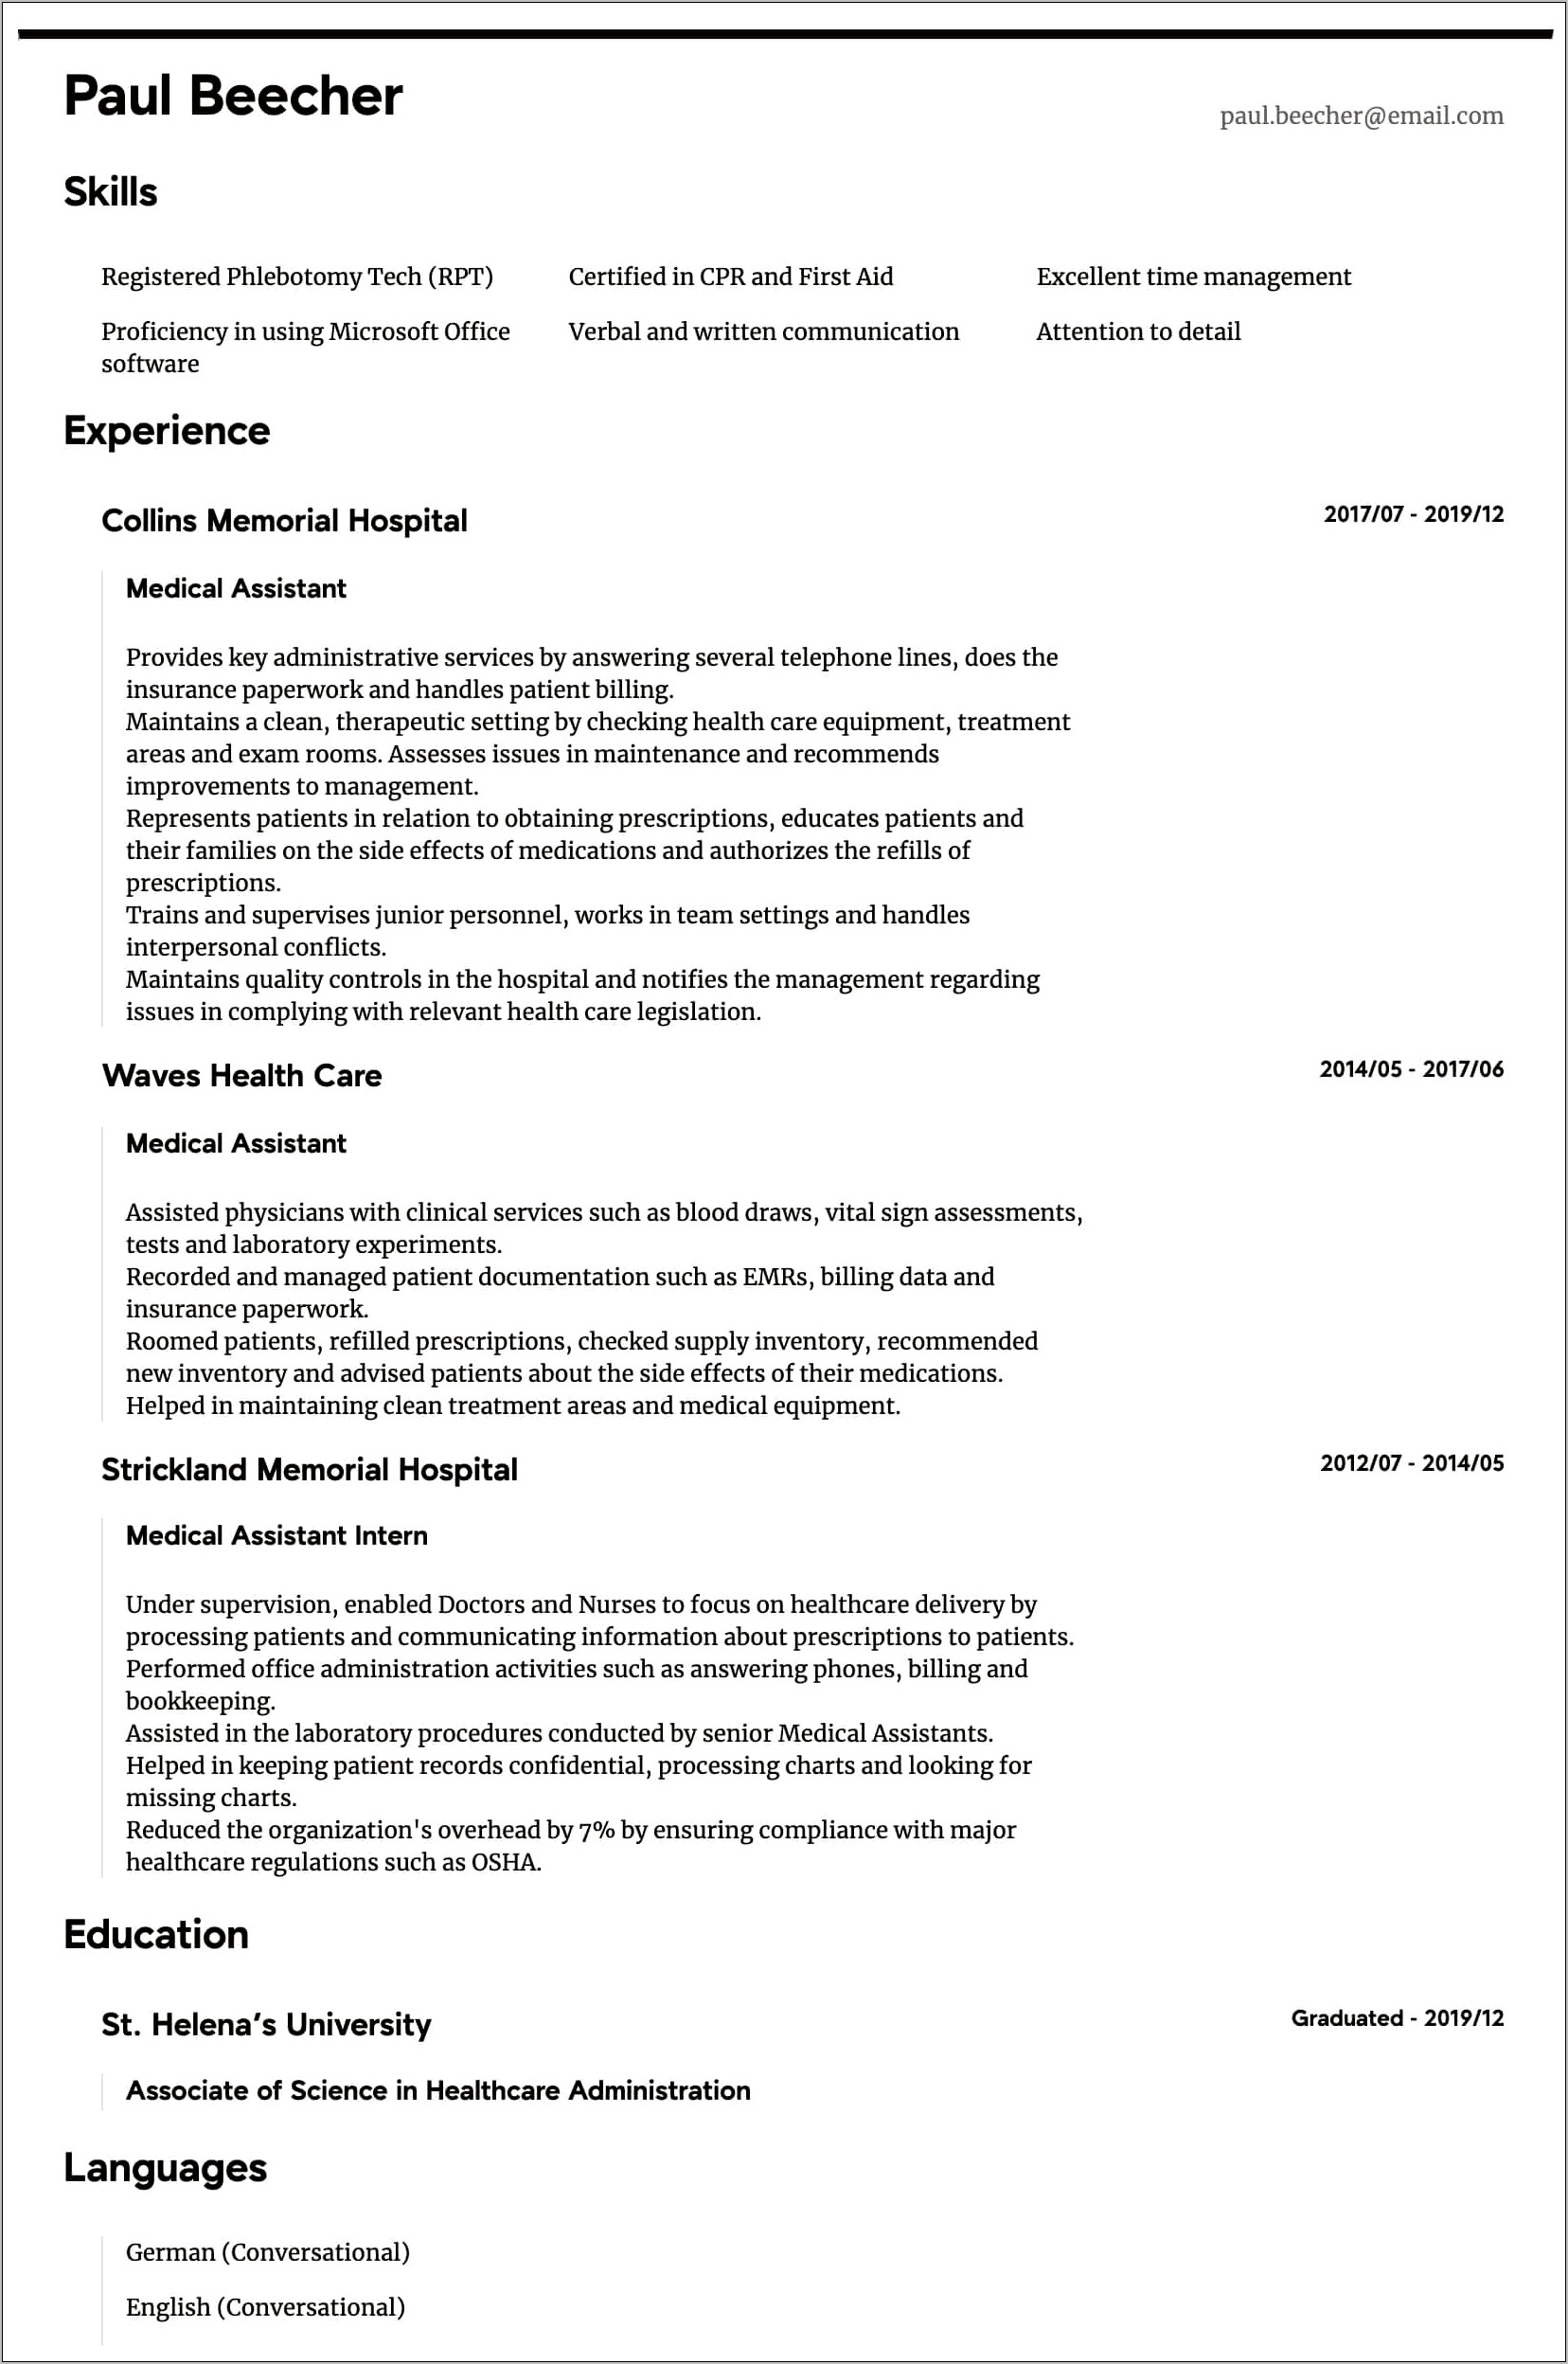 Samples Of Certified Medical Assistant Resumes